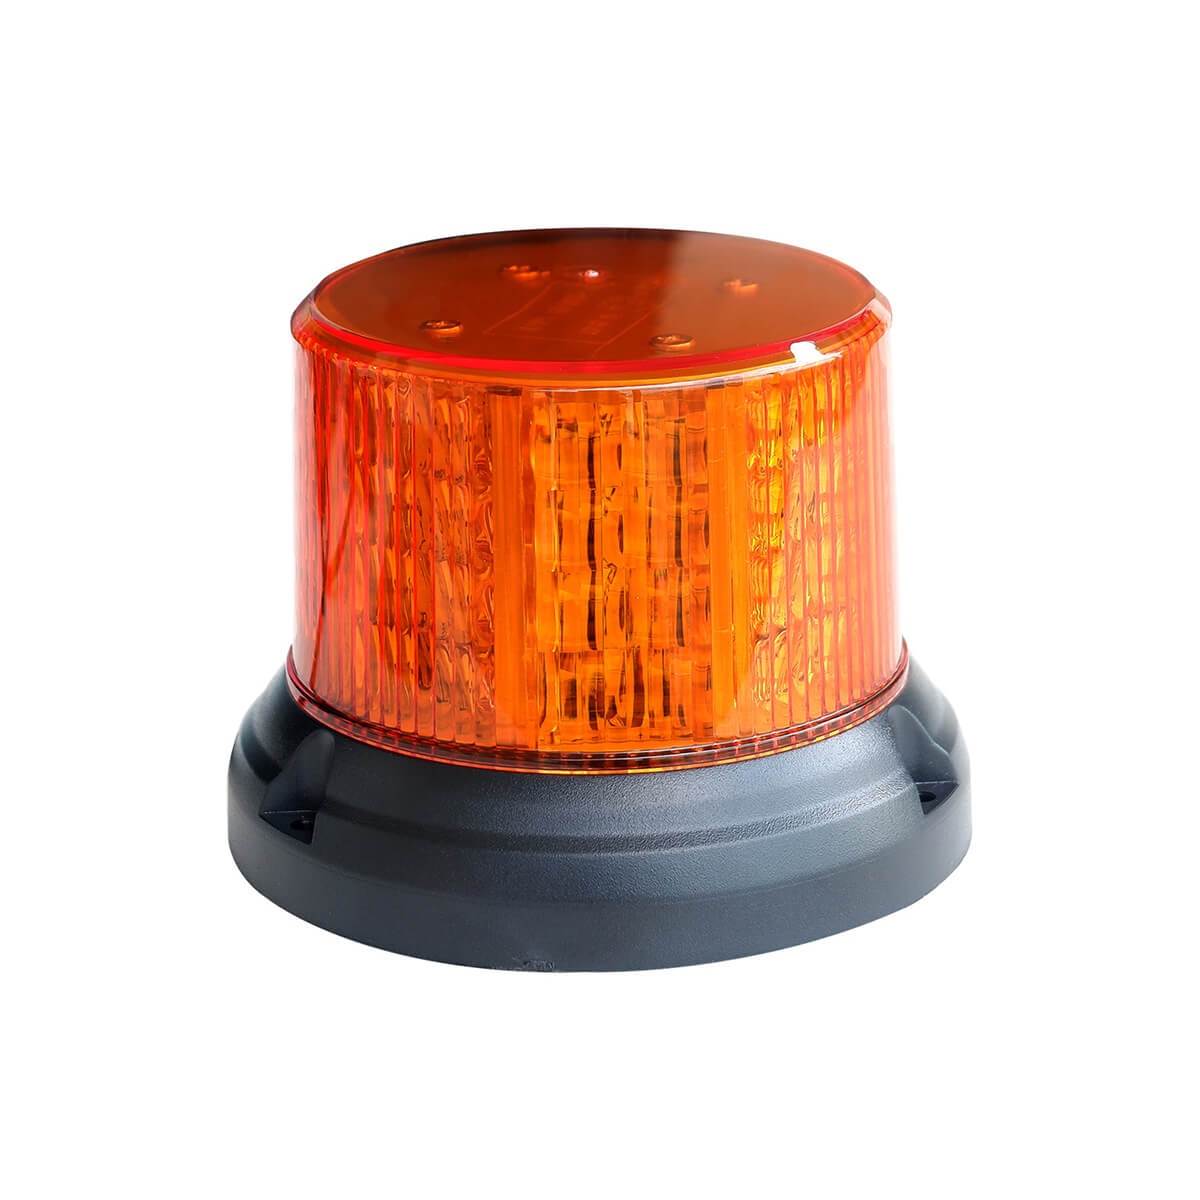 Super Bright High Quality Durable Amber Magnetic Beacon Warning Light